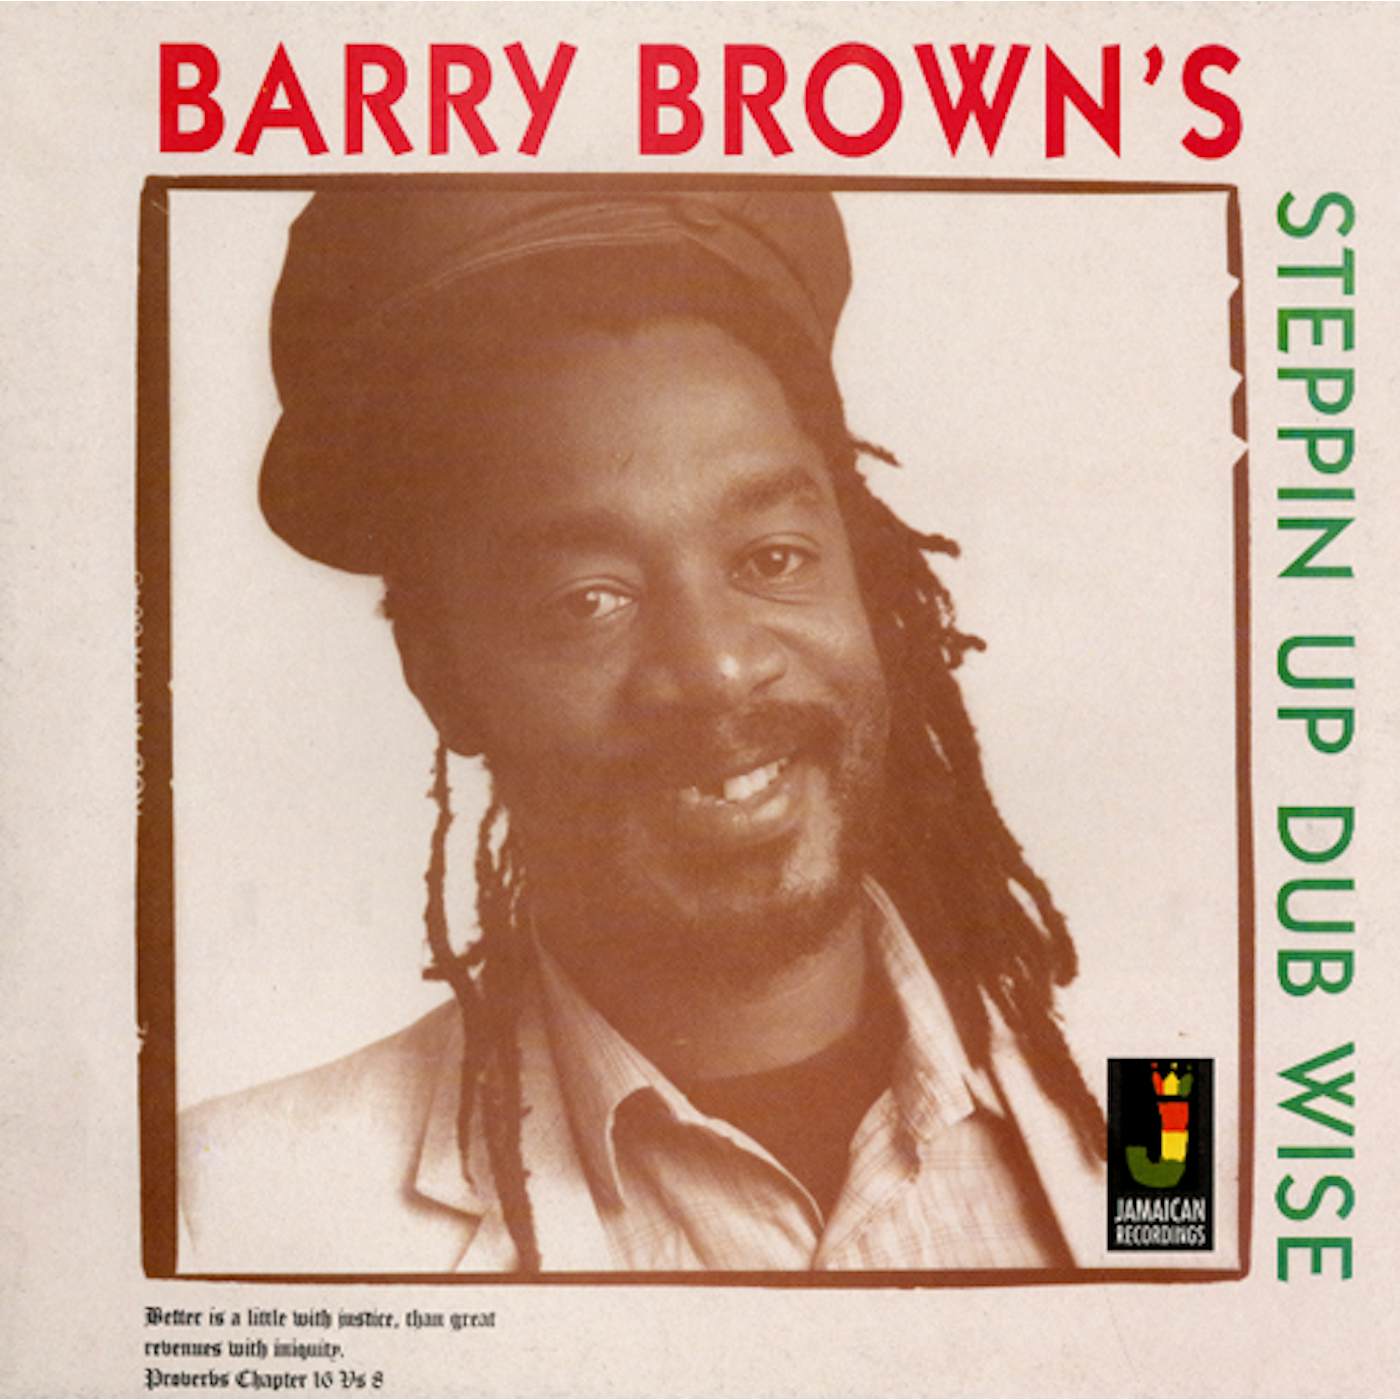 Barry Brown STEPPIN UP DUBWISE CD